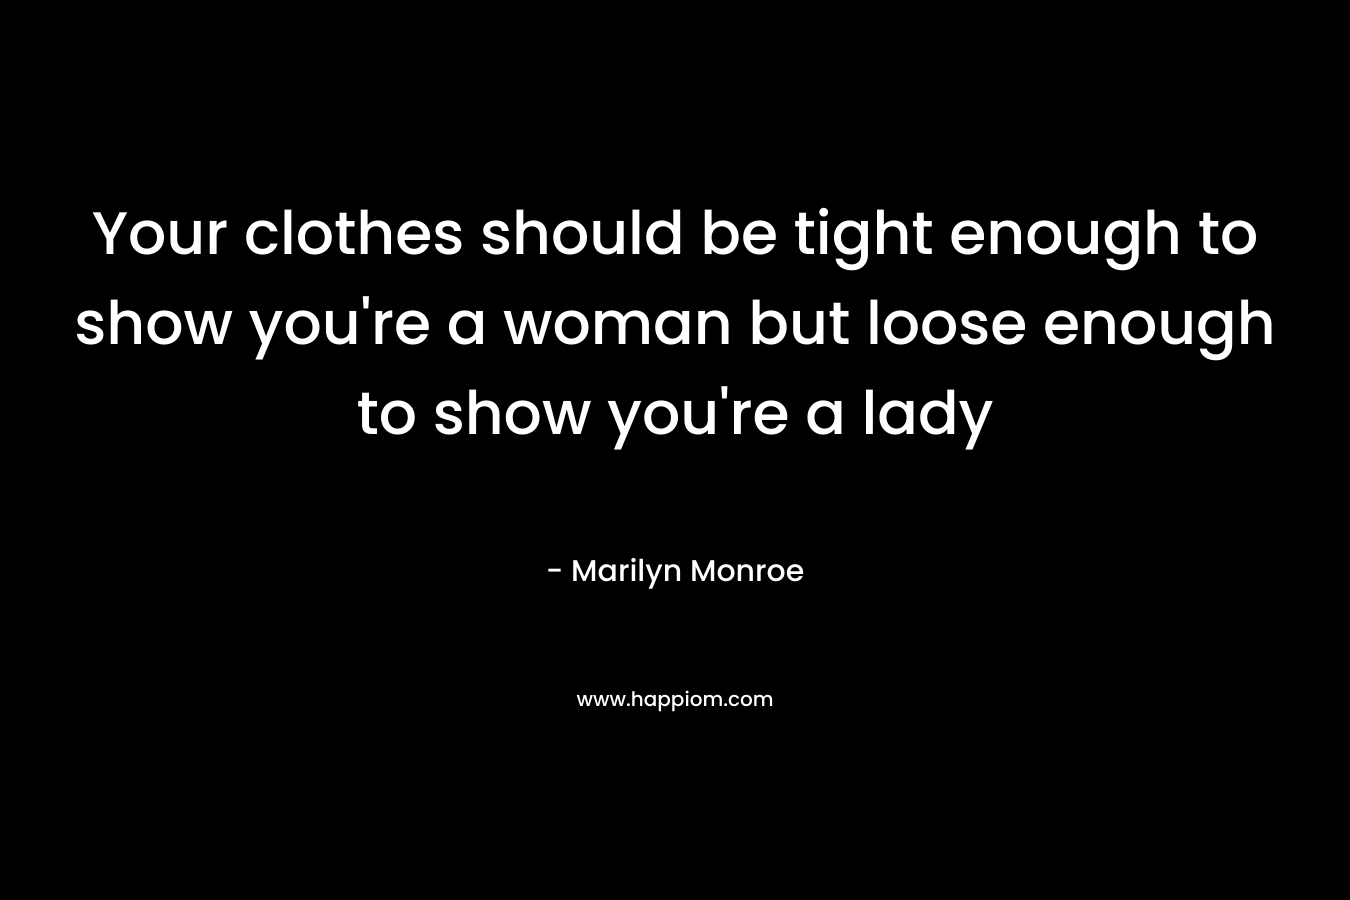 Your clothes should be tight enough to show you're a woman but loose enough to show you're a lady